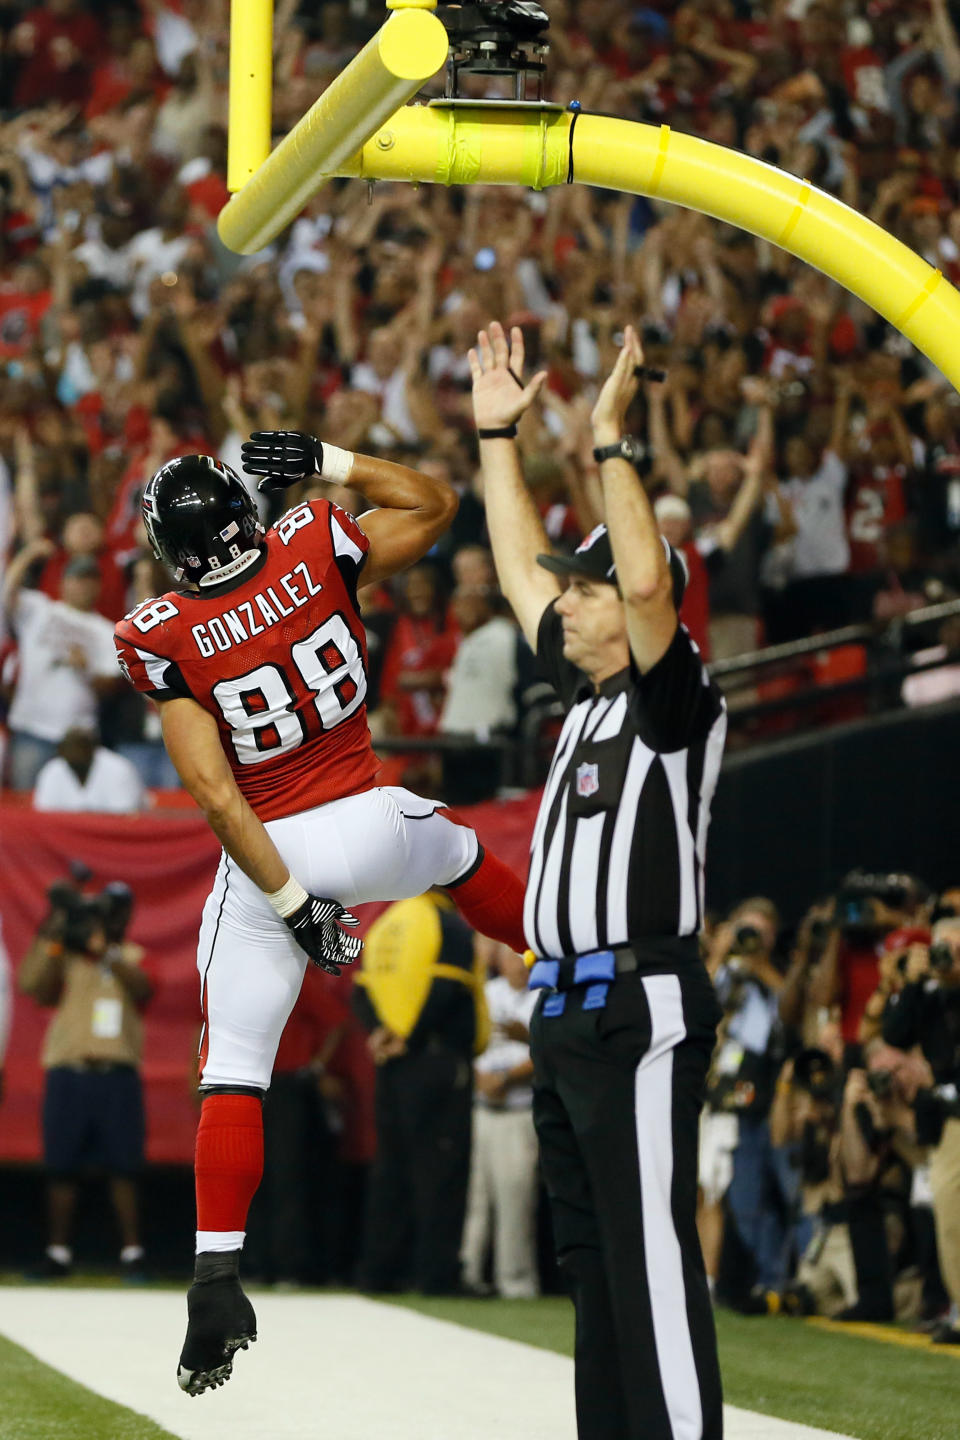 ATLANTA, GA - SEPTEMBER 17: Tight end Tony Gonzalez #88 of the Atlanta Falcons celebrates after scoring a touchdown in the second quarter against the Denver Broncos during a game at the Georgia Dome on September 17, 2012 in Atlanta, Georgia. (Photo by Kevin C. Cox/Getty Images)